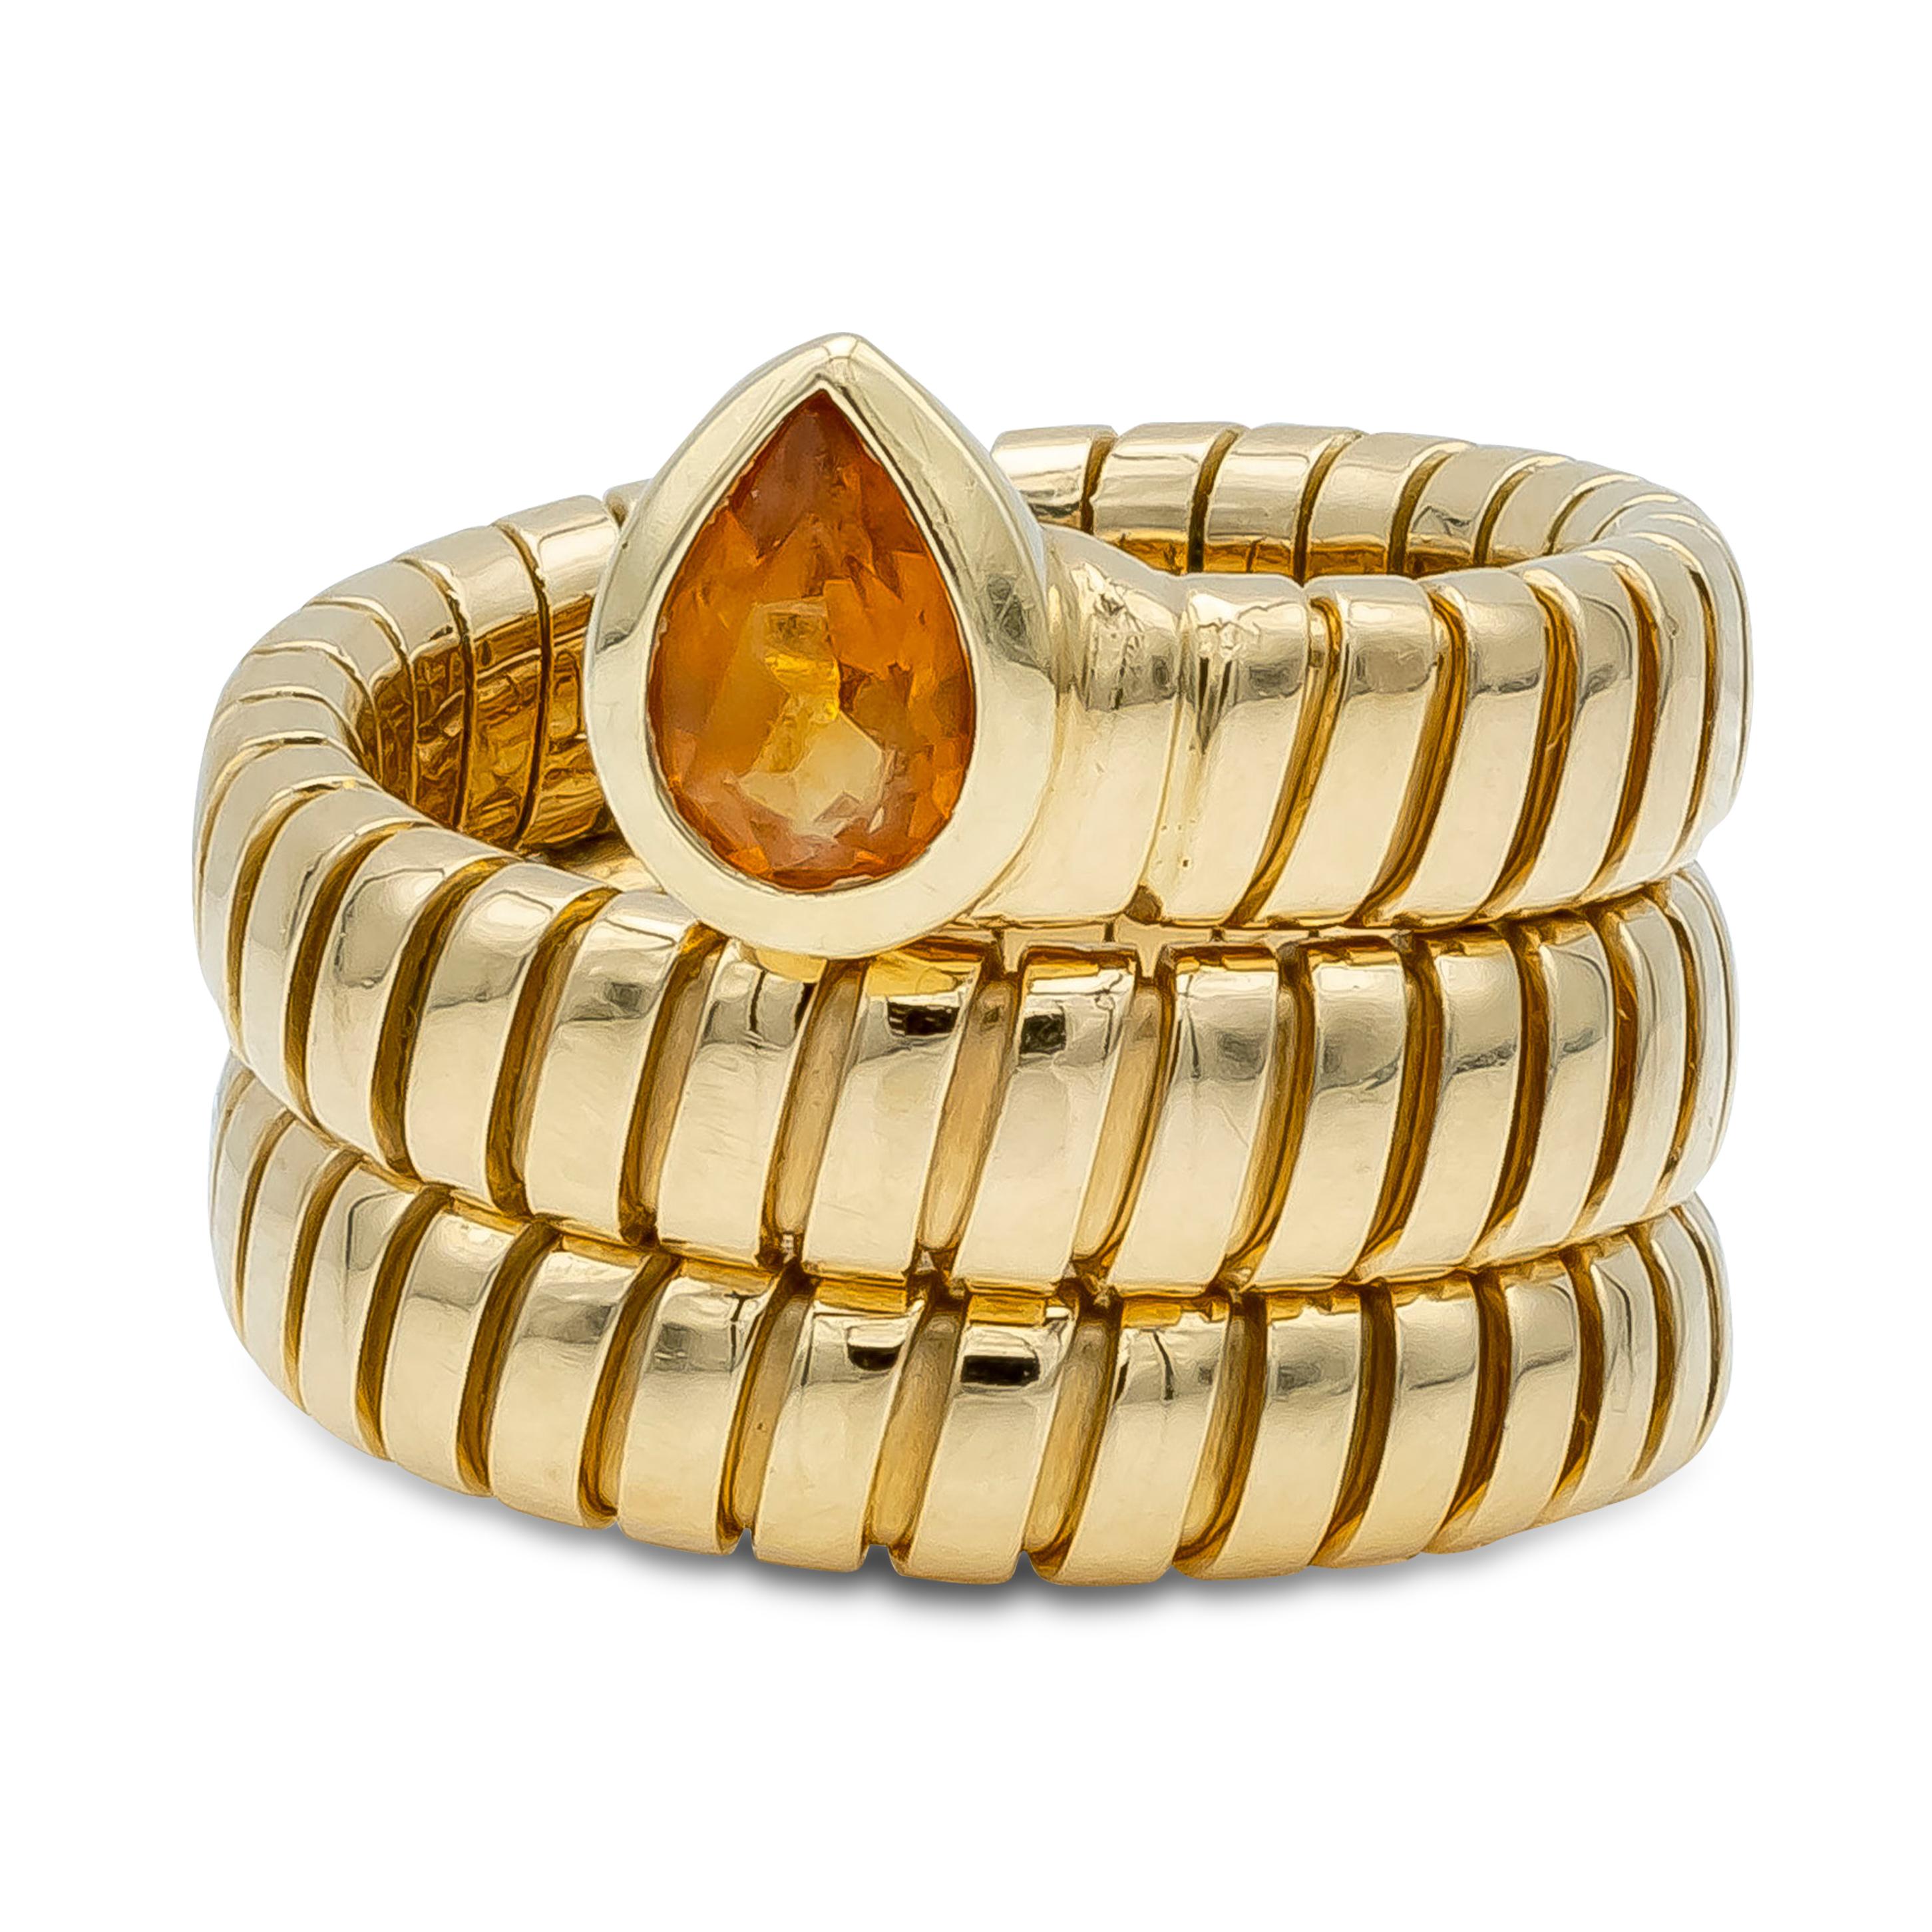 An Iconic Ring from Bvlgari design feature 3 Coil Tubagas Serpenti Ring with a Pear-shape Orange Citrine weighing 1 carat total. Made with 18K Yellow Gold, Size 6 US Stretch.
Made and Signed by Bvlgari